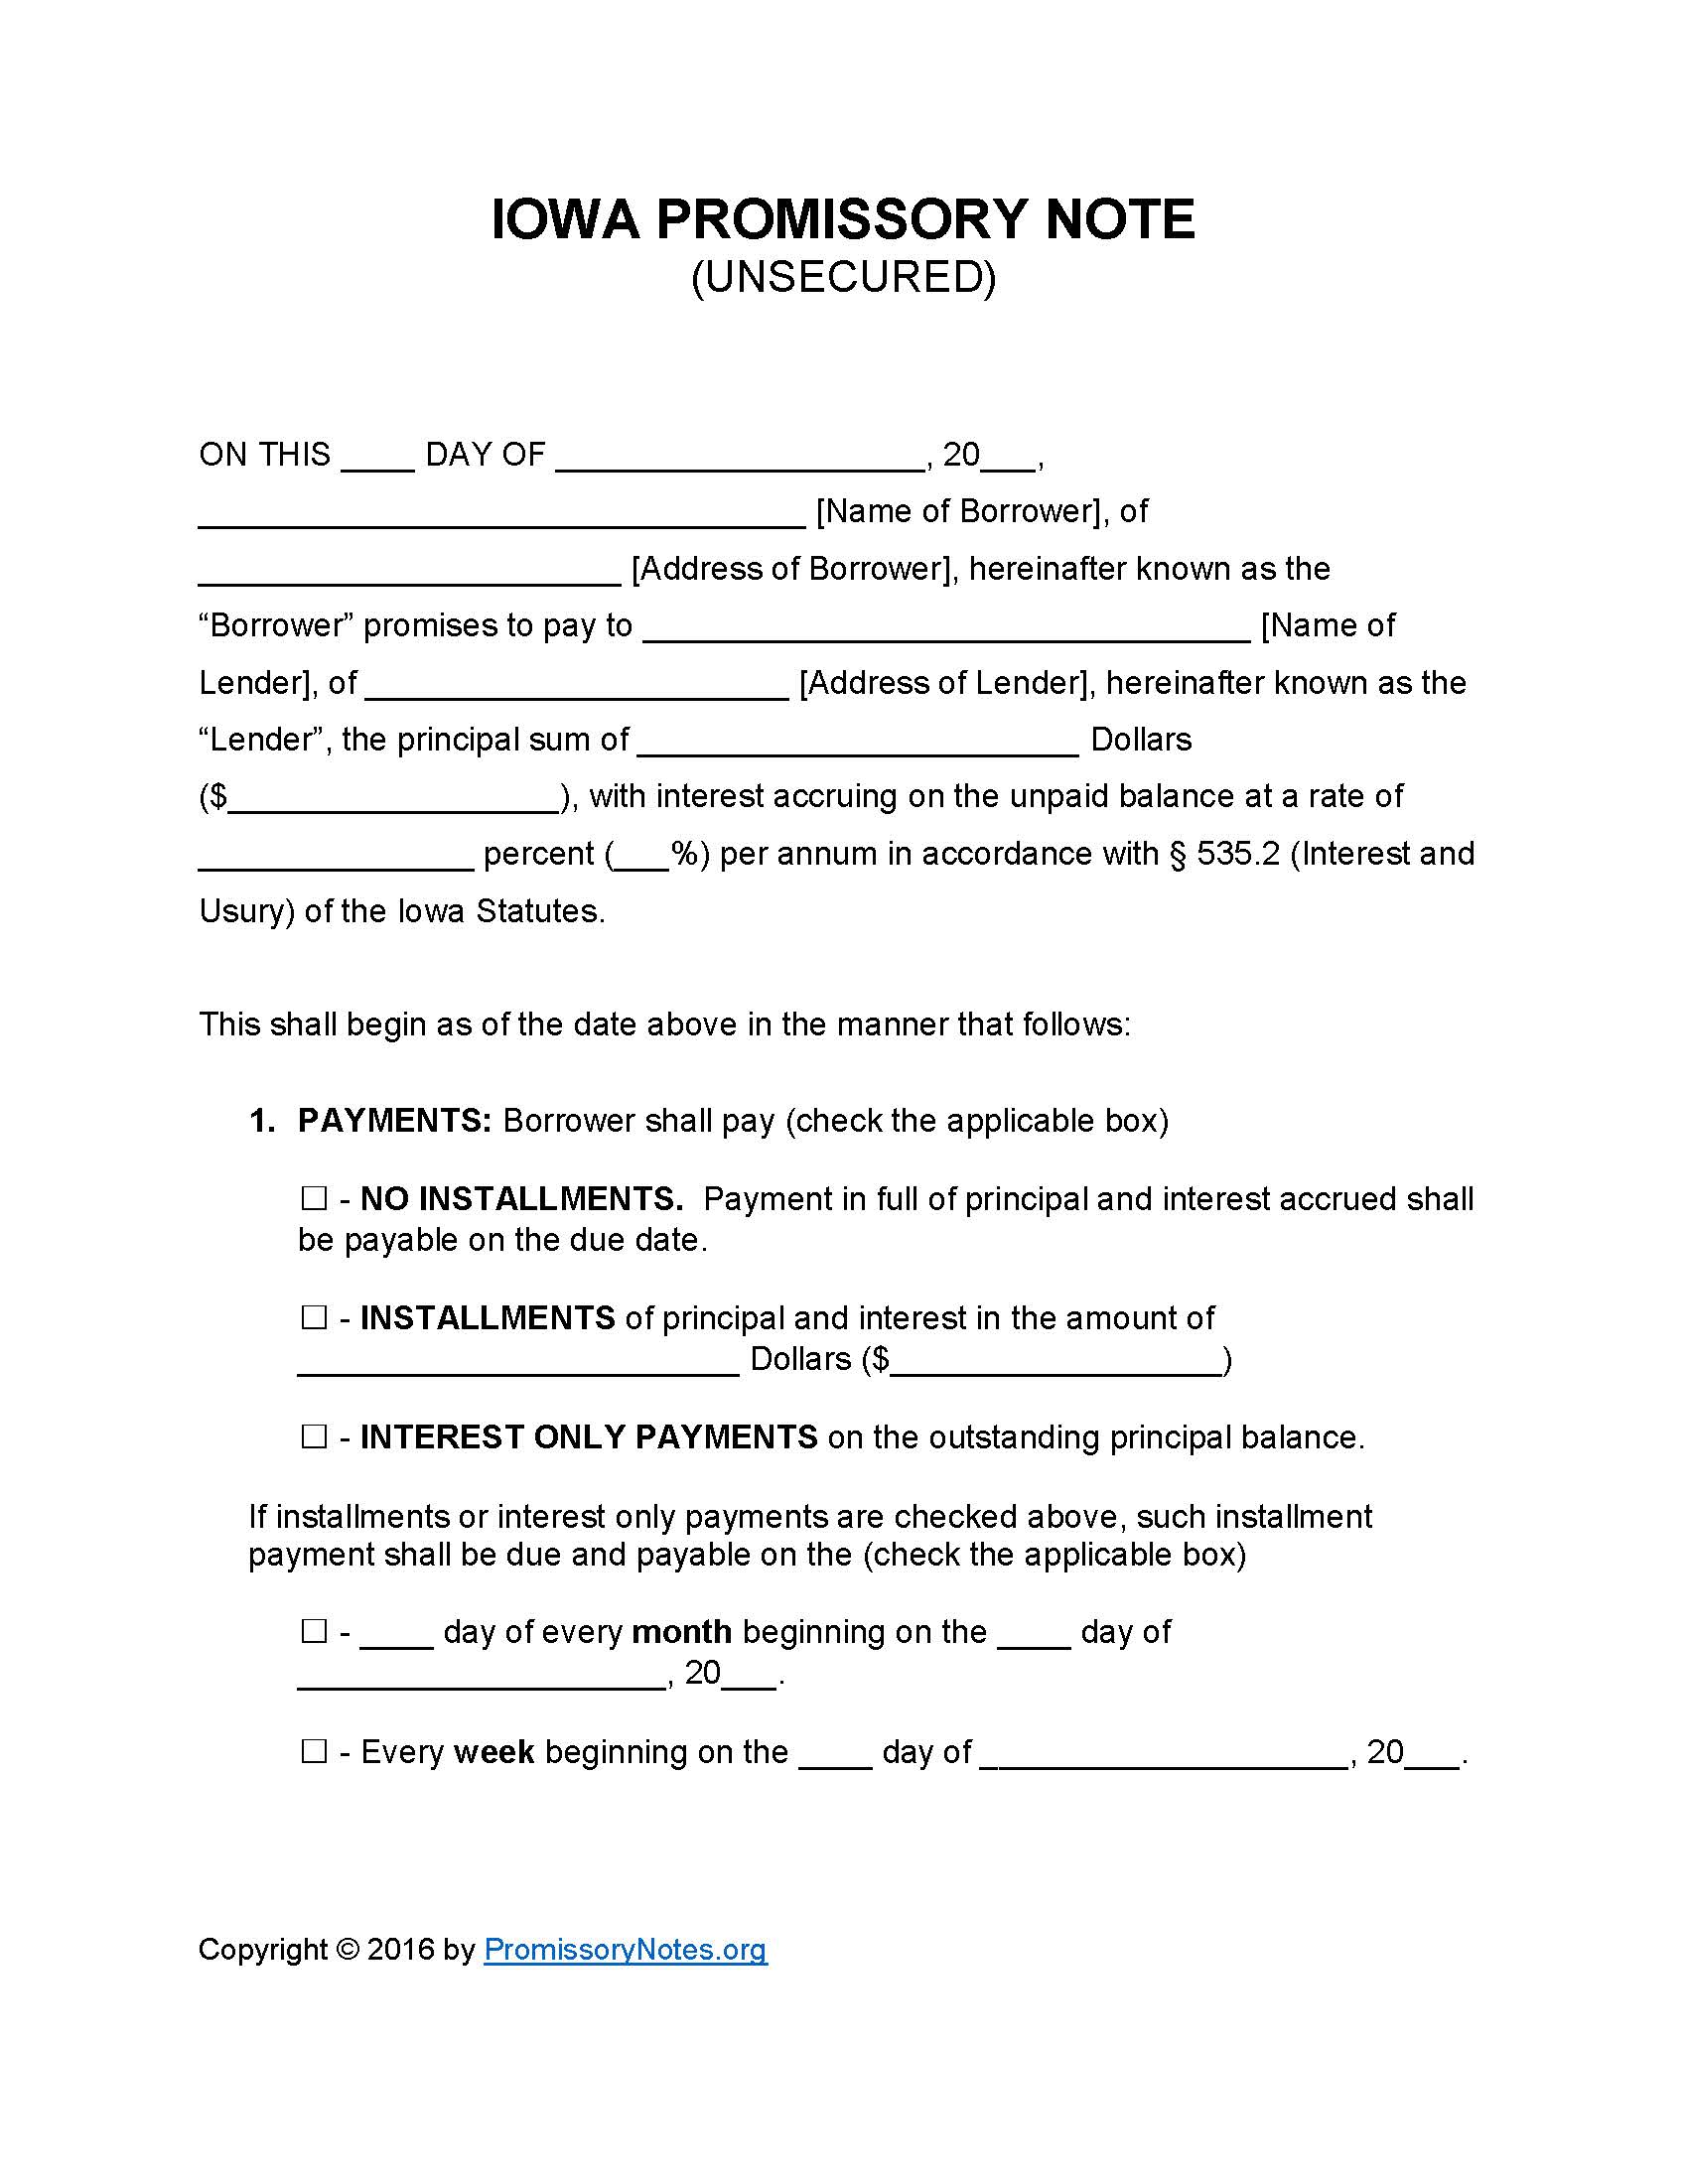 iowa-unsecured-promissory-note-form